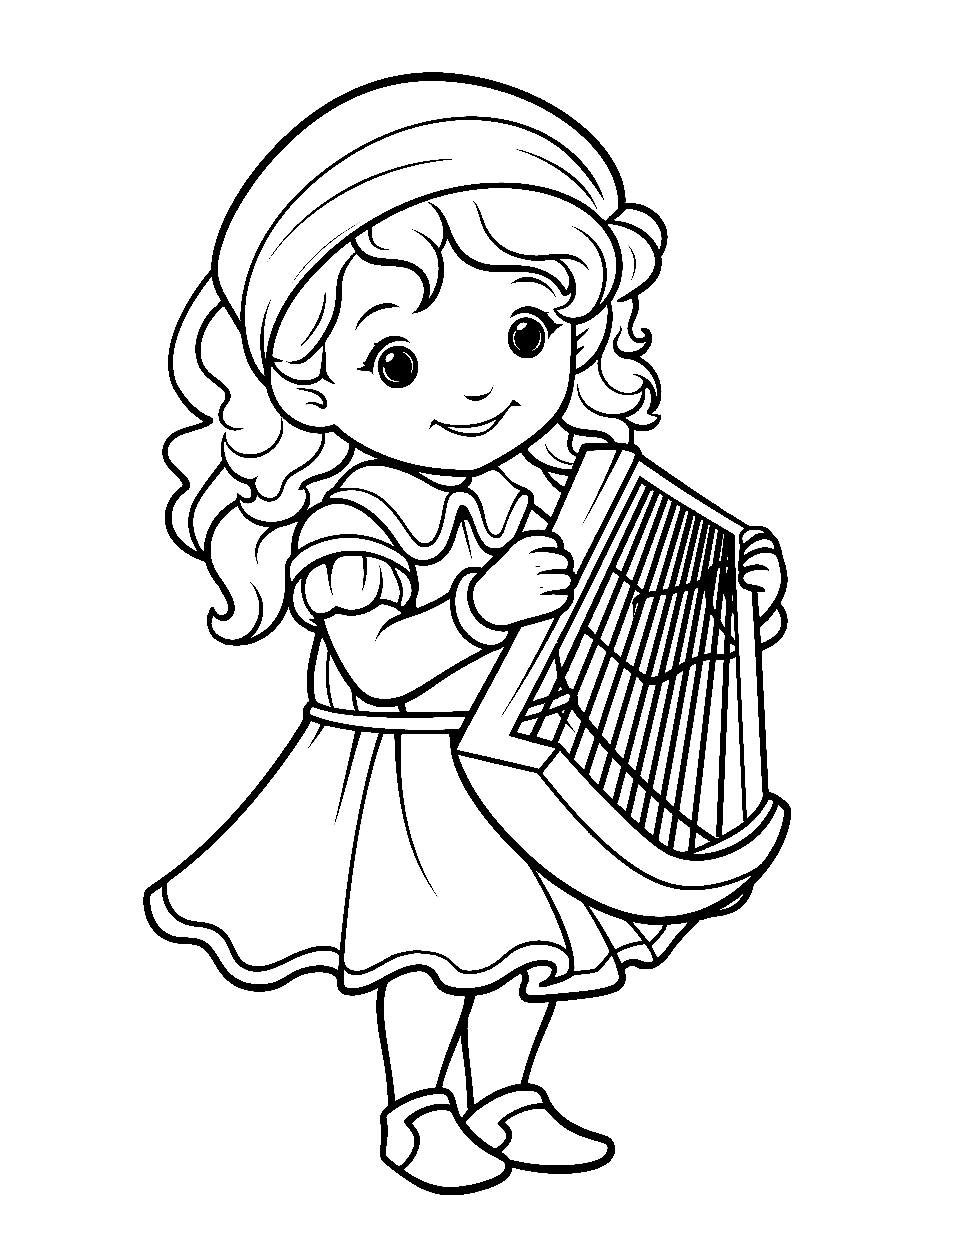 Elf Playing a Magical Lyre Coloring Page - An elf playing beautiful melodies on a lyre.